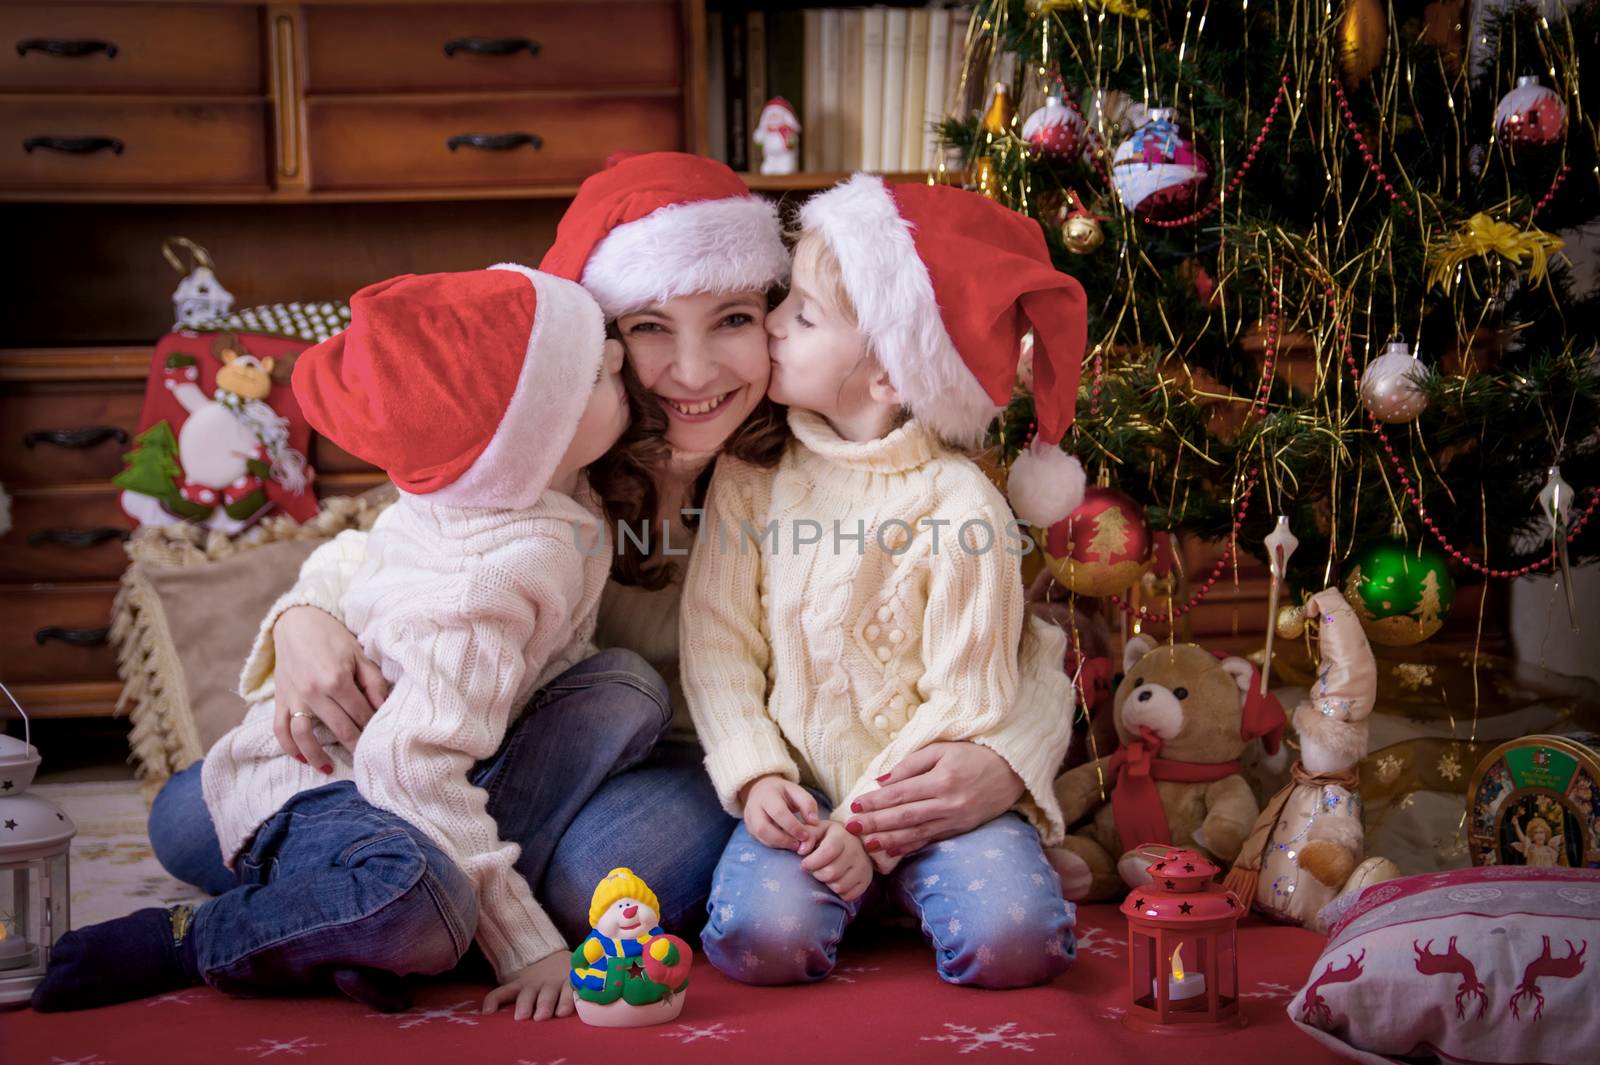 Kids kissing theit mother at cheek under Christmas tree by Angel_a